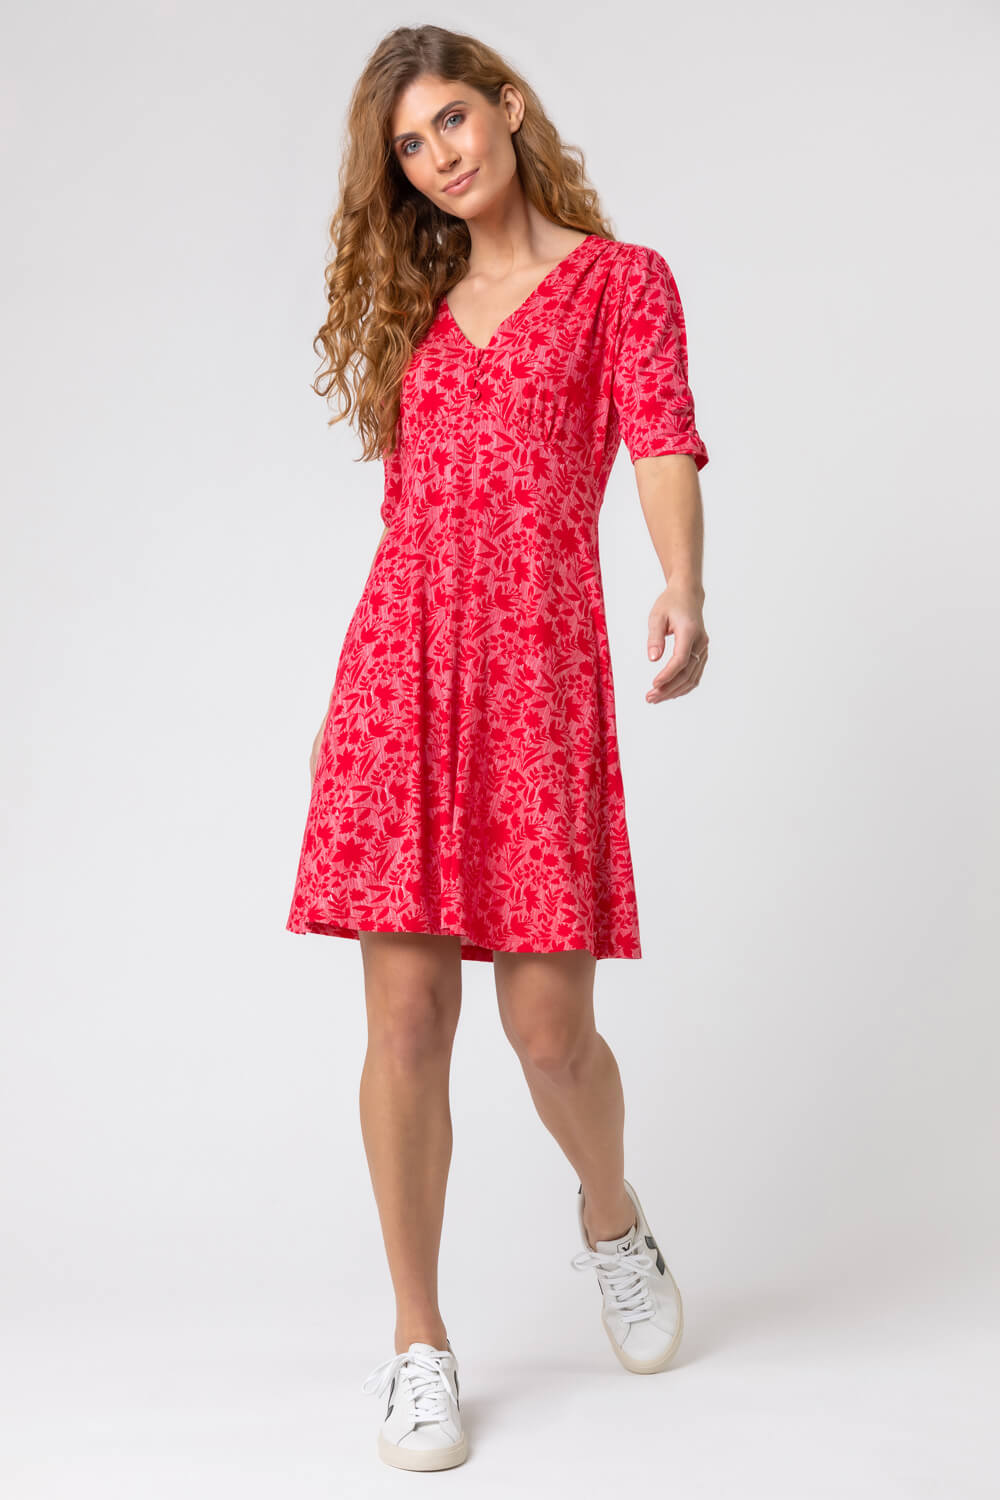 Red Floral Print Buttoned Tea Dress, Image 2 of 5